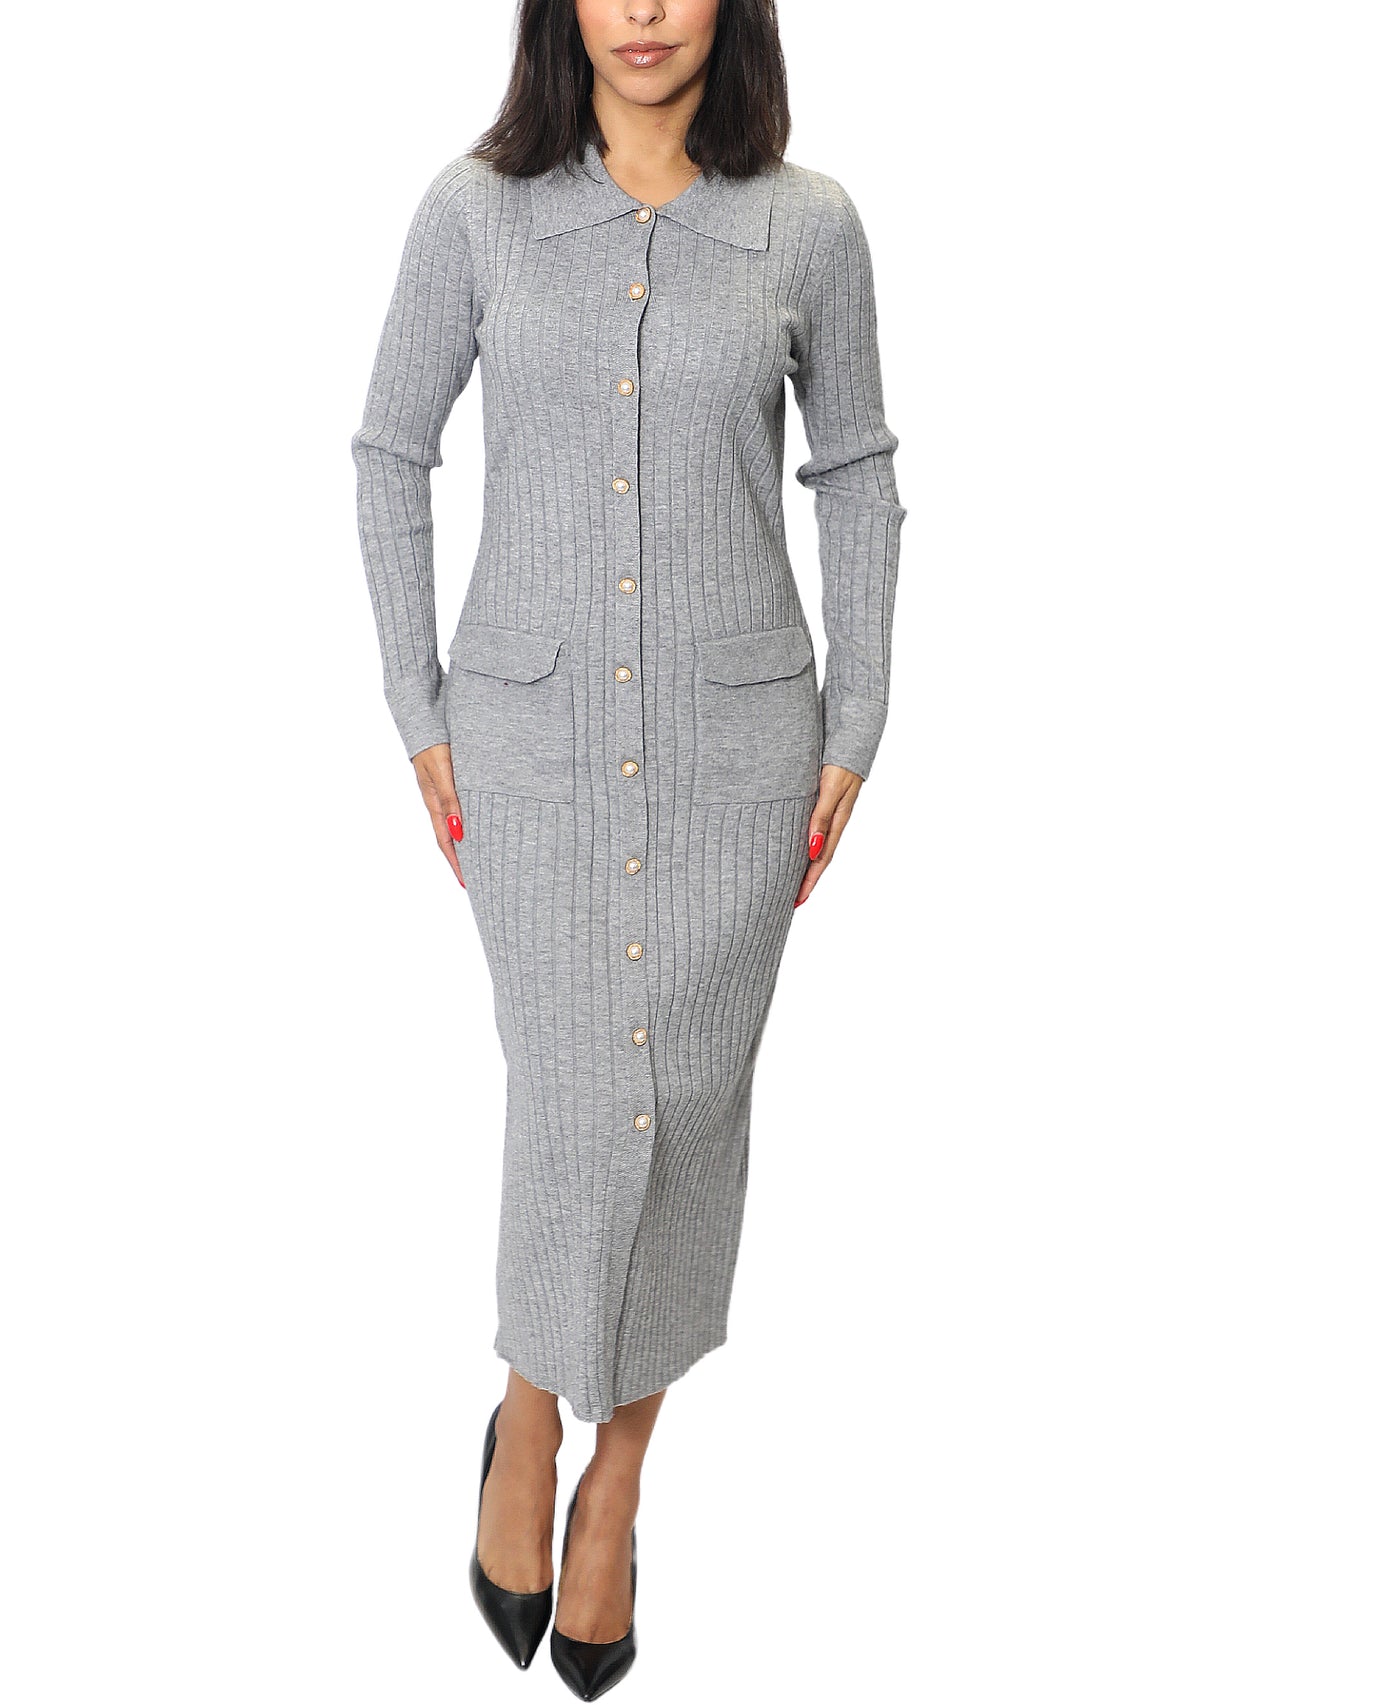 Ribbed Knit Dress w/ Pearl Button Detail image 1